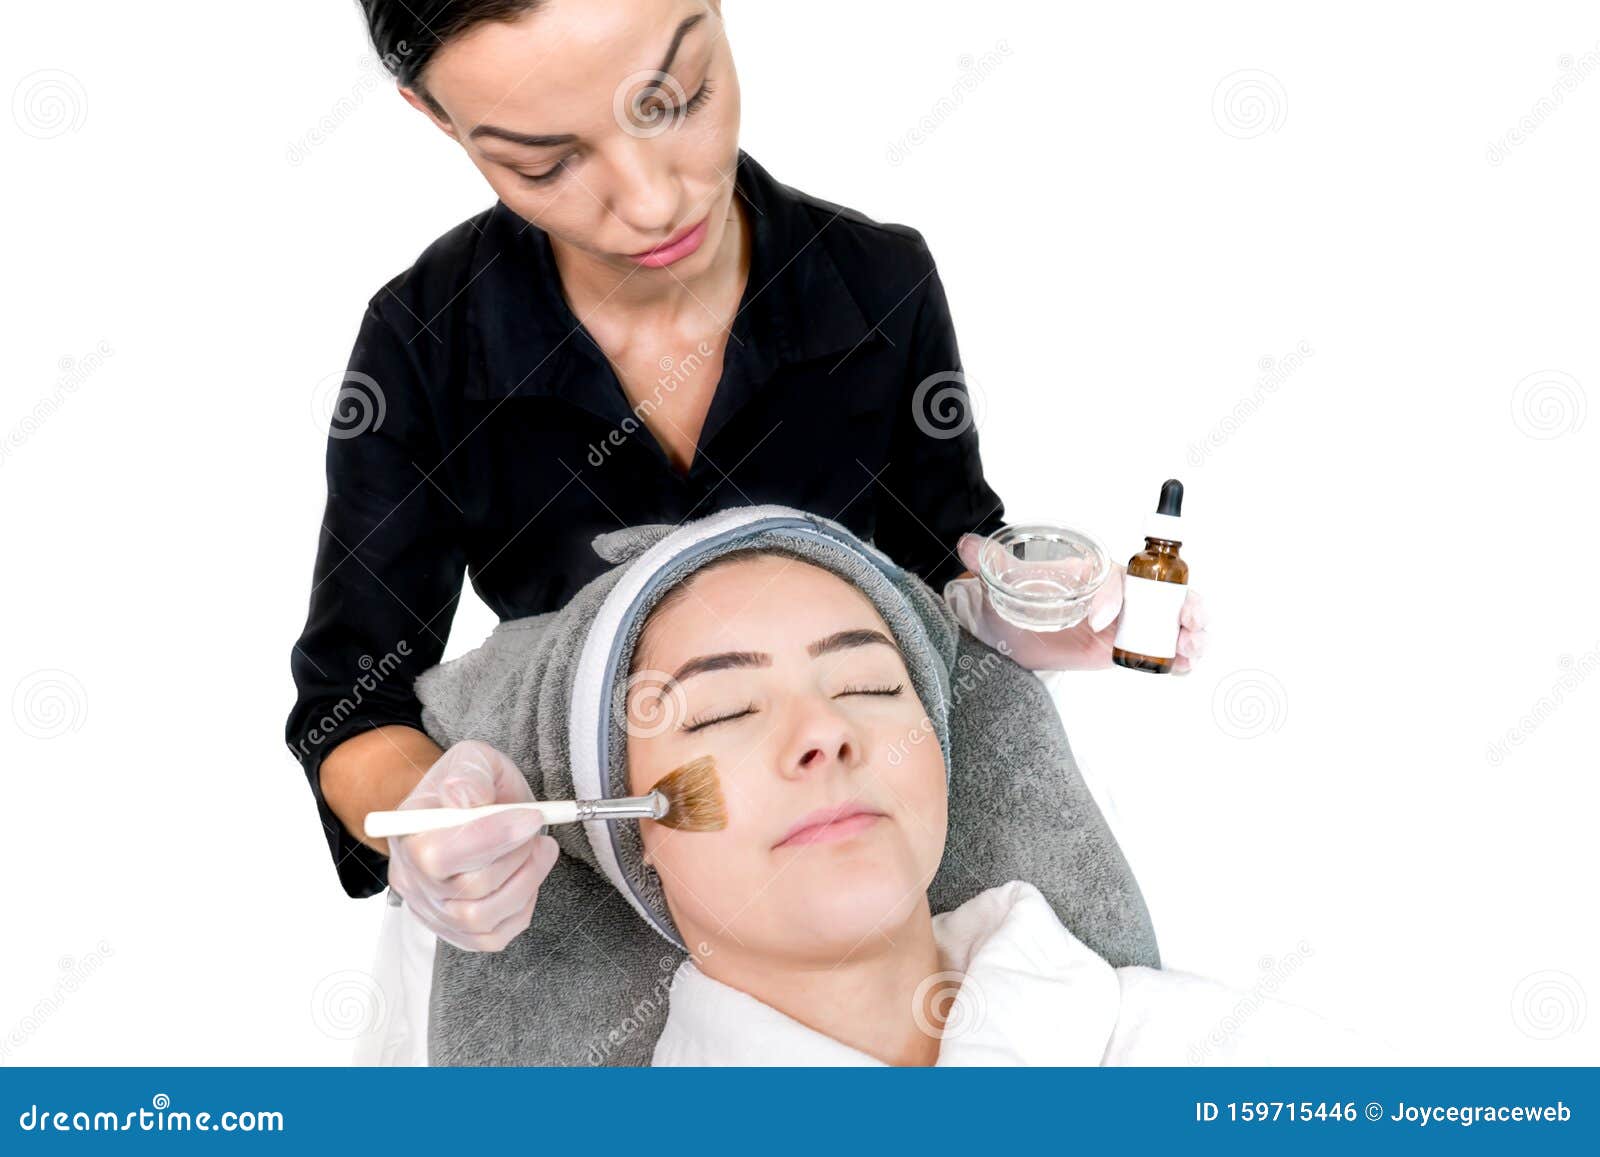 Cosmetologist Administering Chemical Peel Treatment On Patient In A